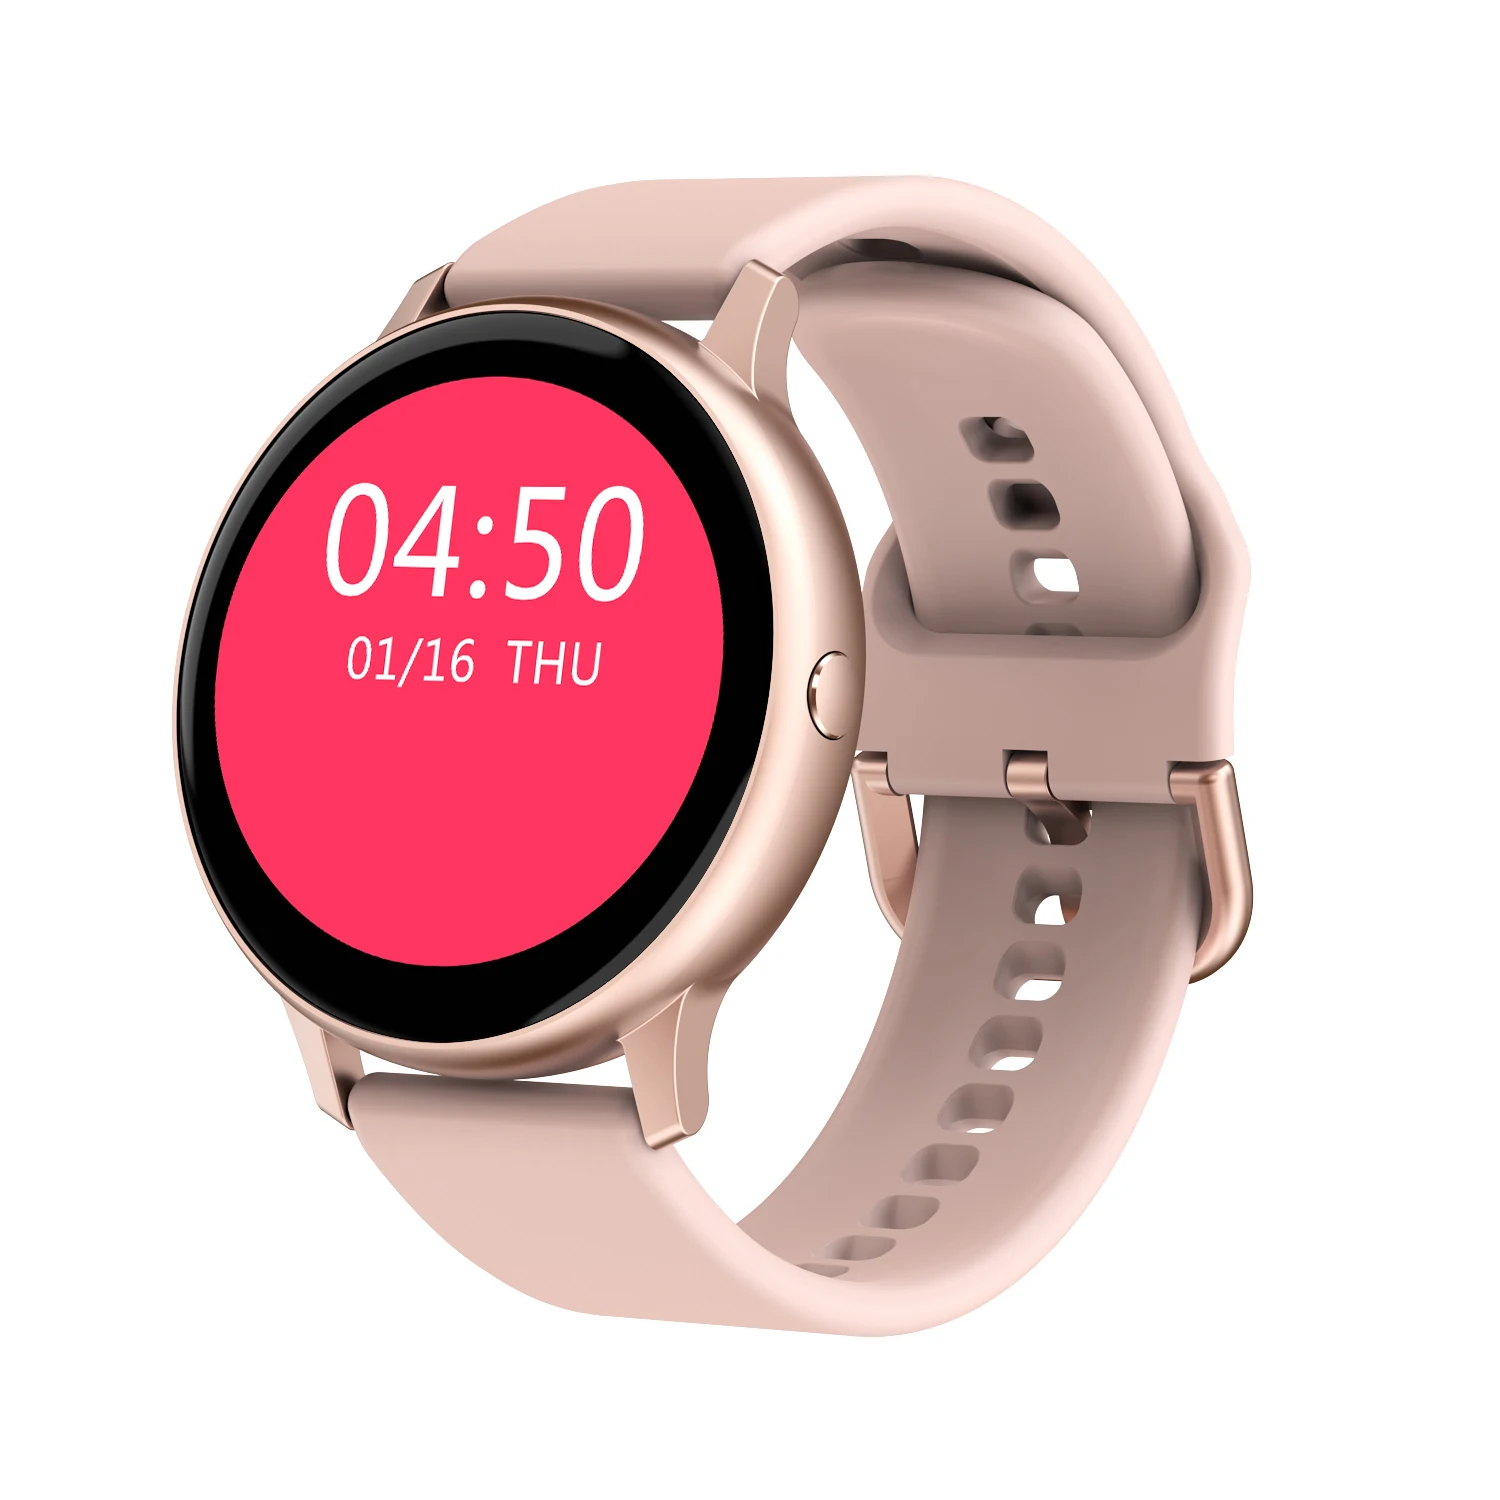 

Smart Watch DT88Pro Full Touch Smartwatch Women With Fitness Tracking Blood Pressure Oxygen for Samsuang Huawei Xiaomi Phone